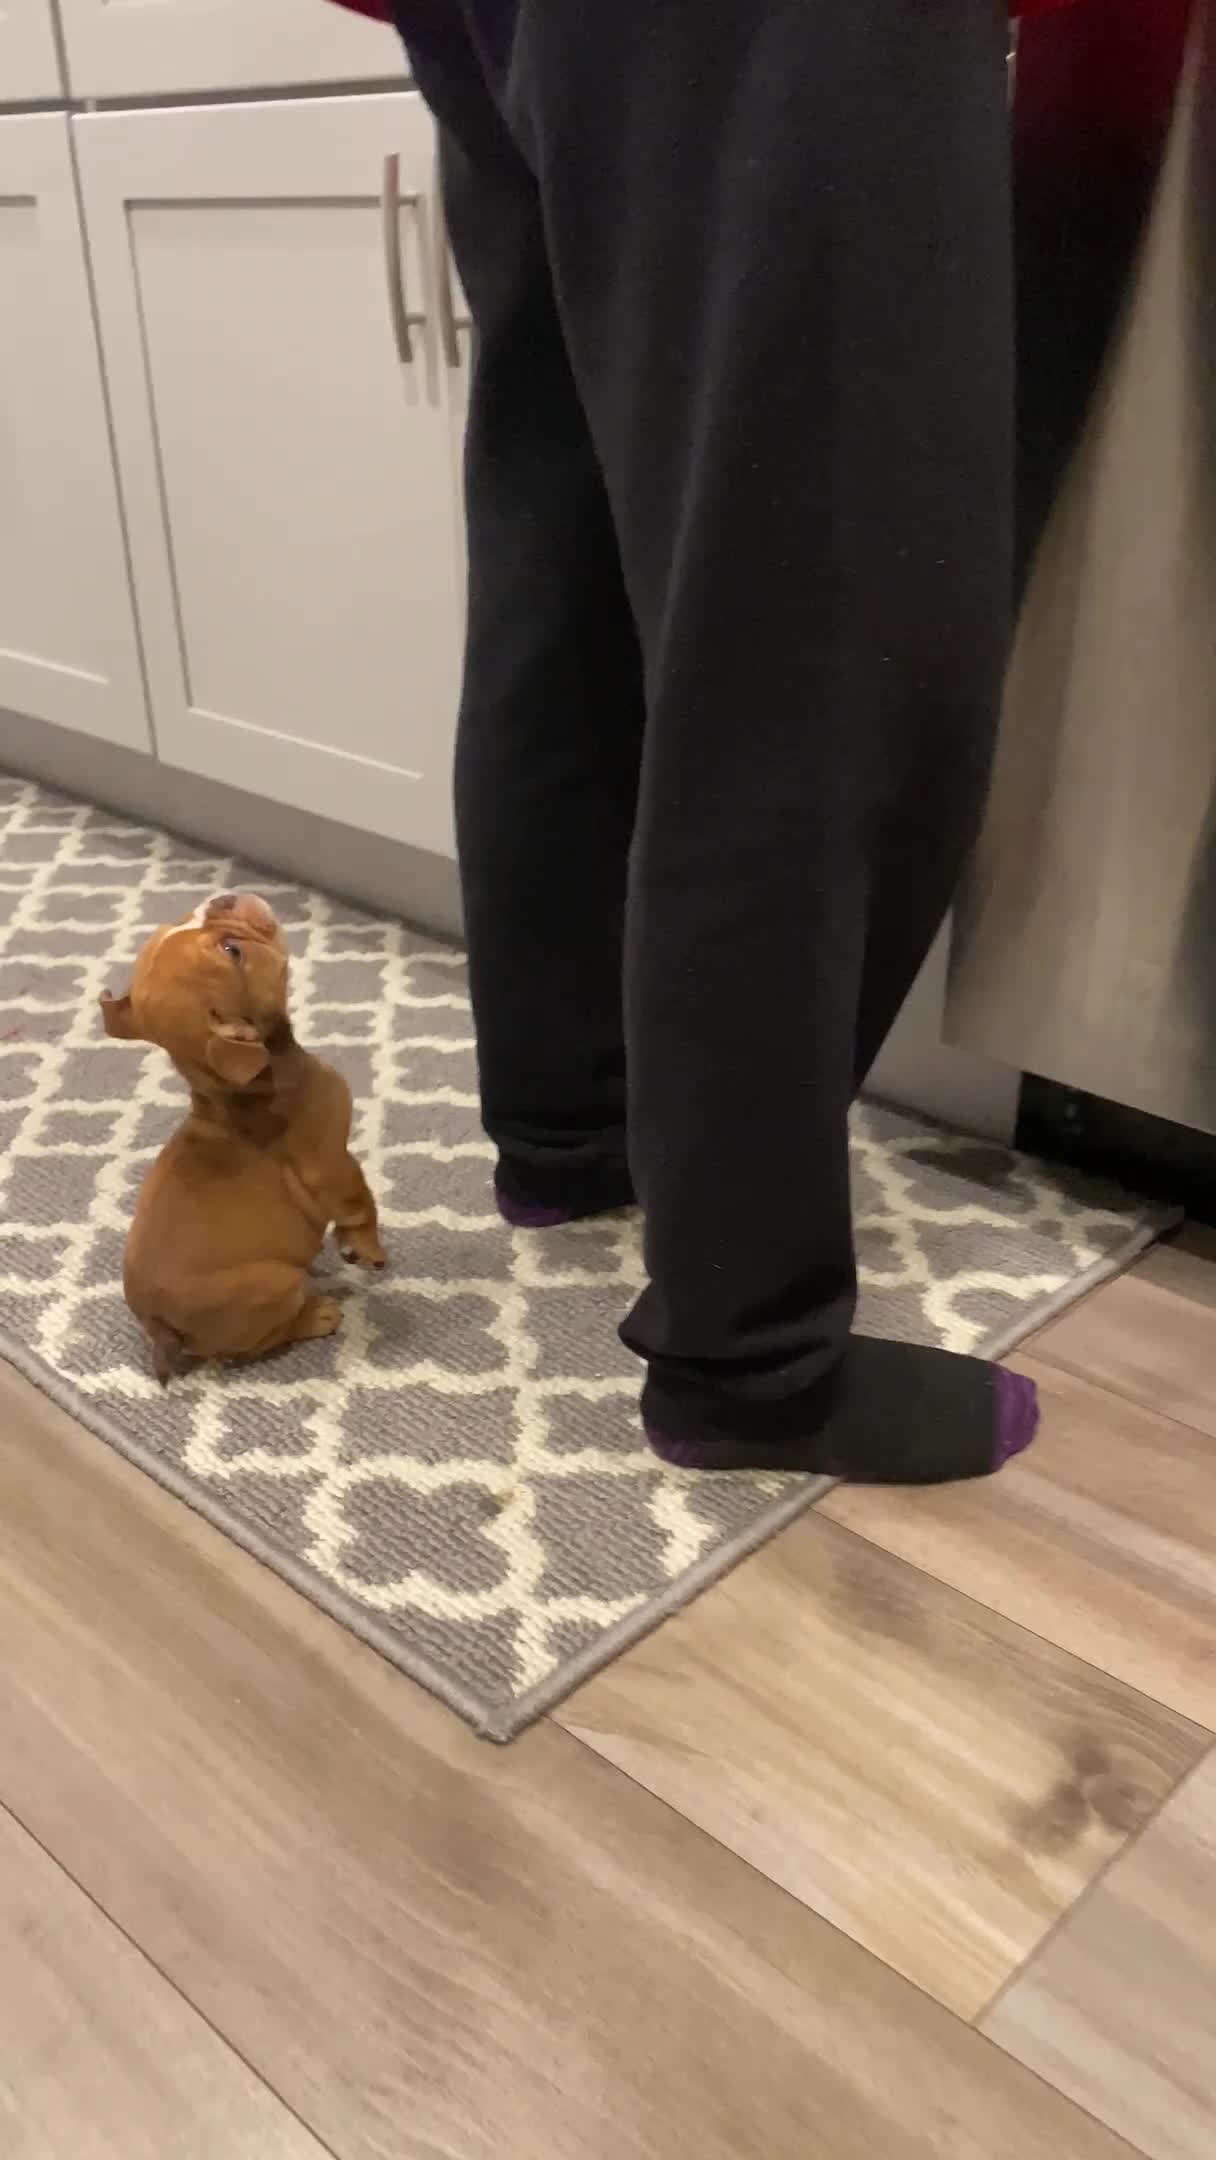 Puppy Whimpers While Owner Prepares His Food